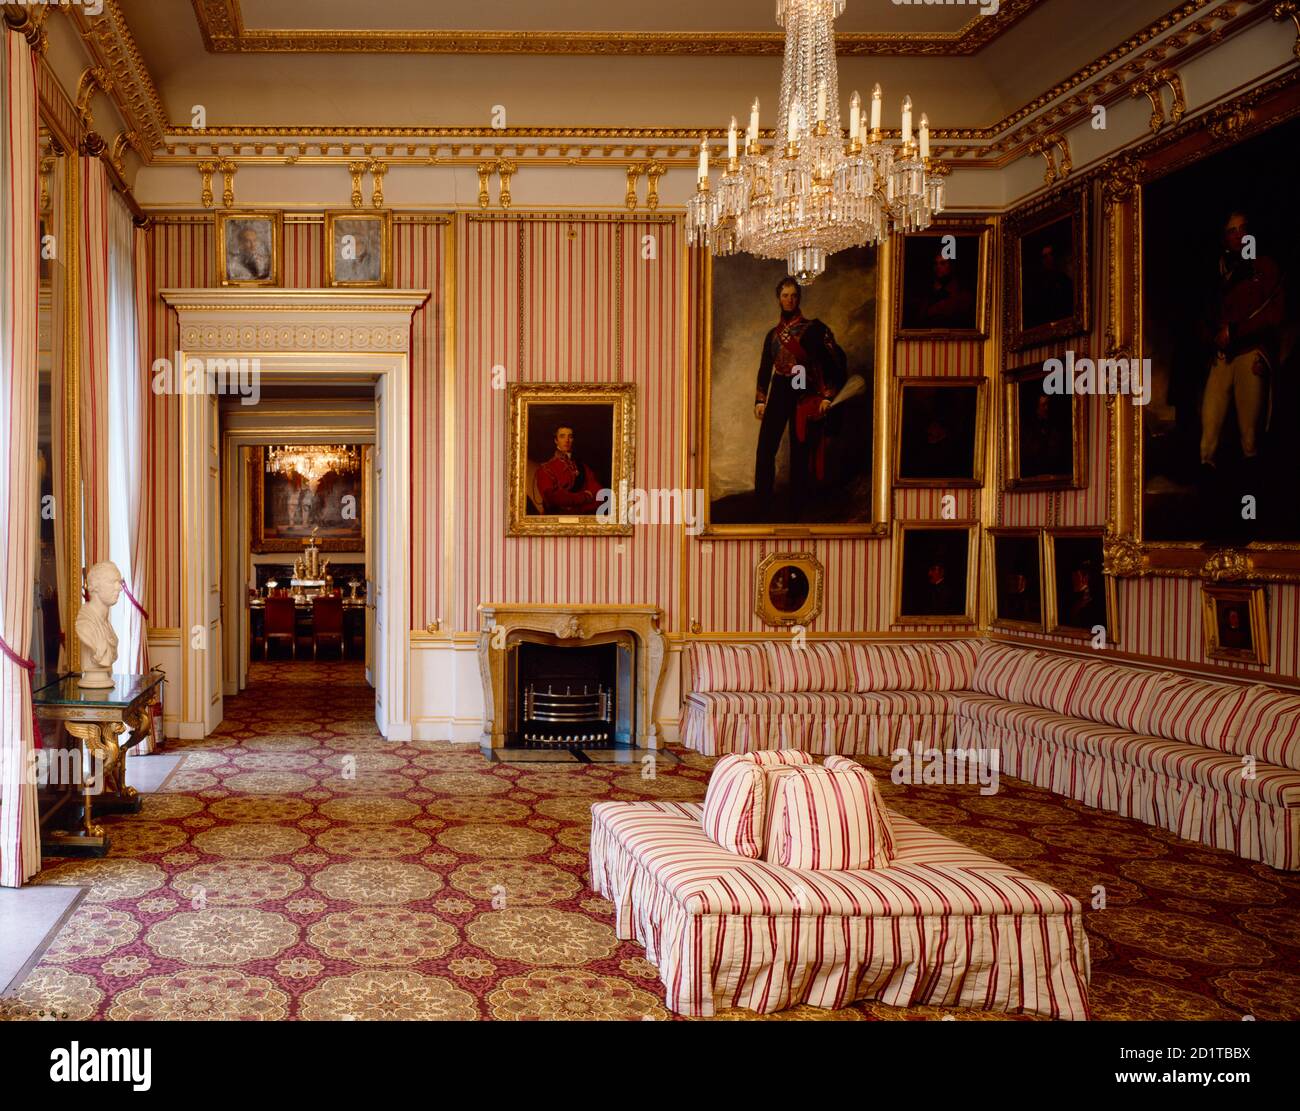 APSLEY HOUSE, London. Interior view of the Striped Drawing Room looking towards the Dining Room. Stock Photo